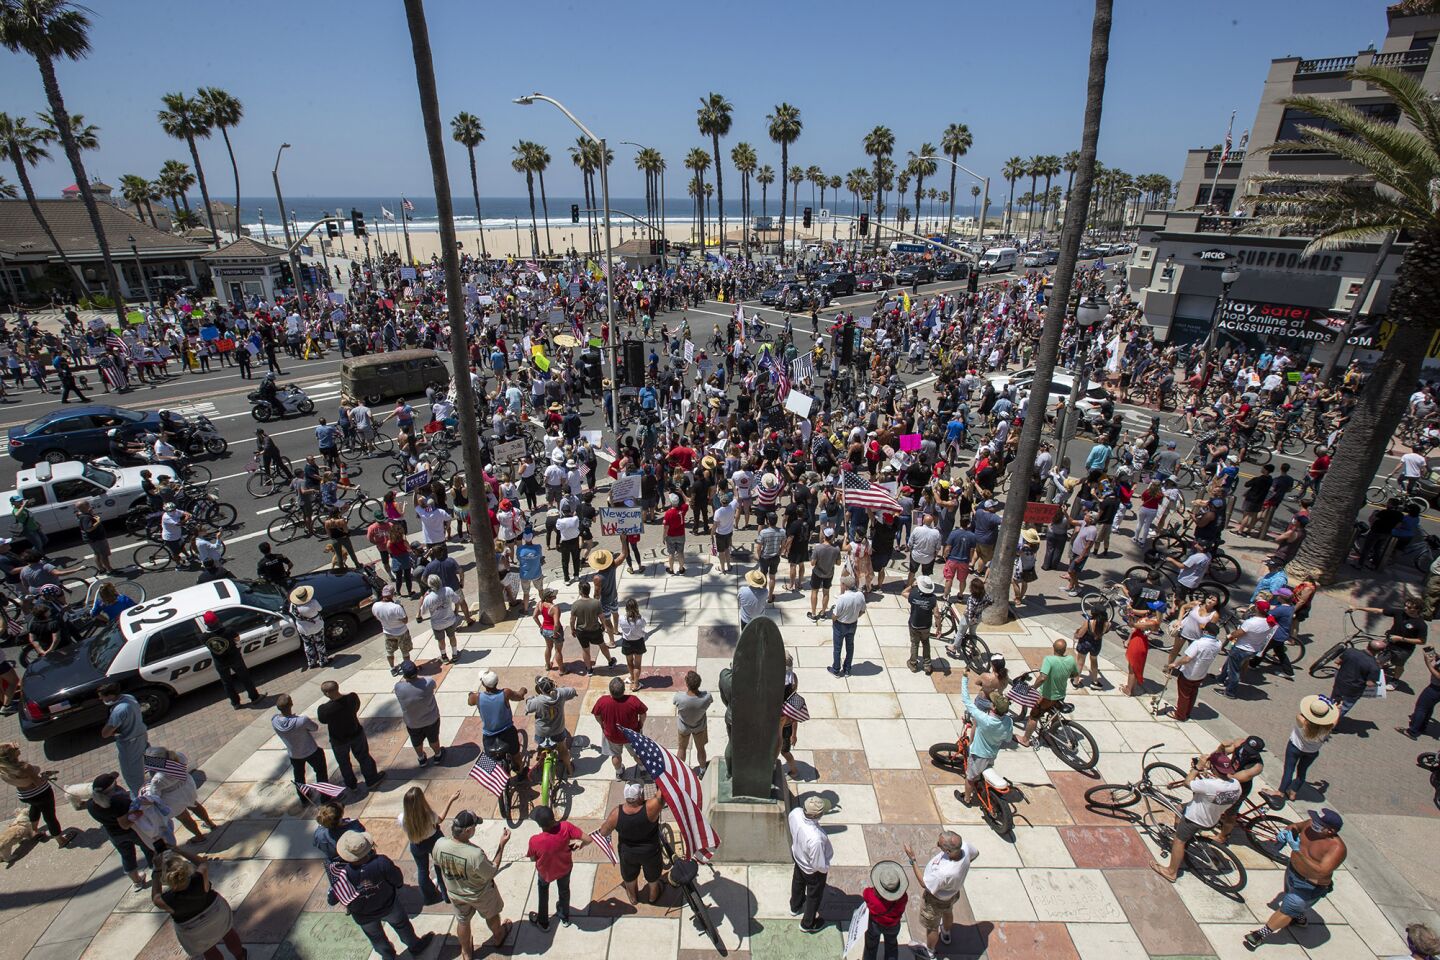 A large crowd gathers during a protest of Gov. Gavin Newsom's stay-at-home orders at Main Street and Pacific Coast Highway in Huntington Beach on Friday.